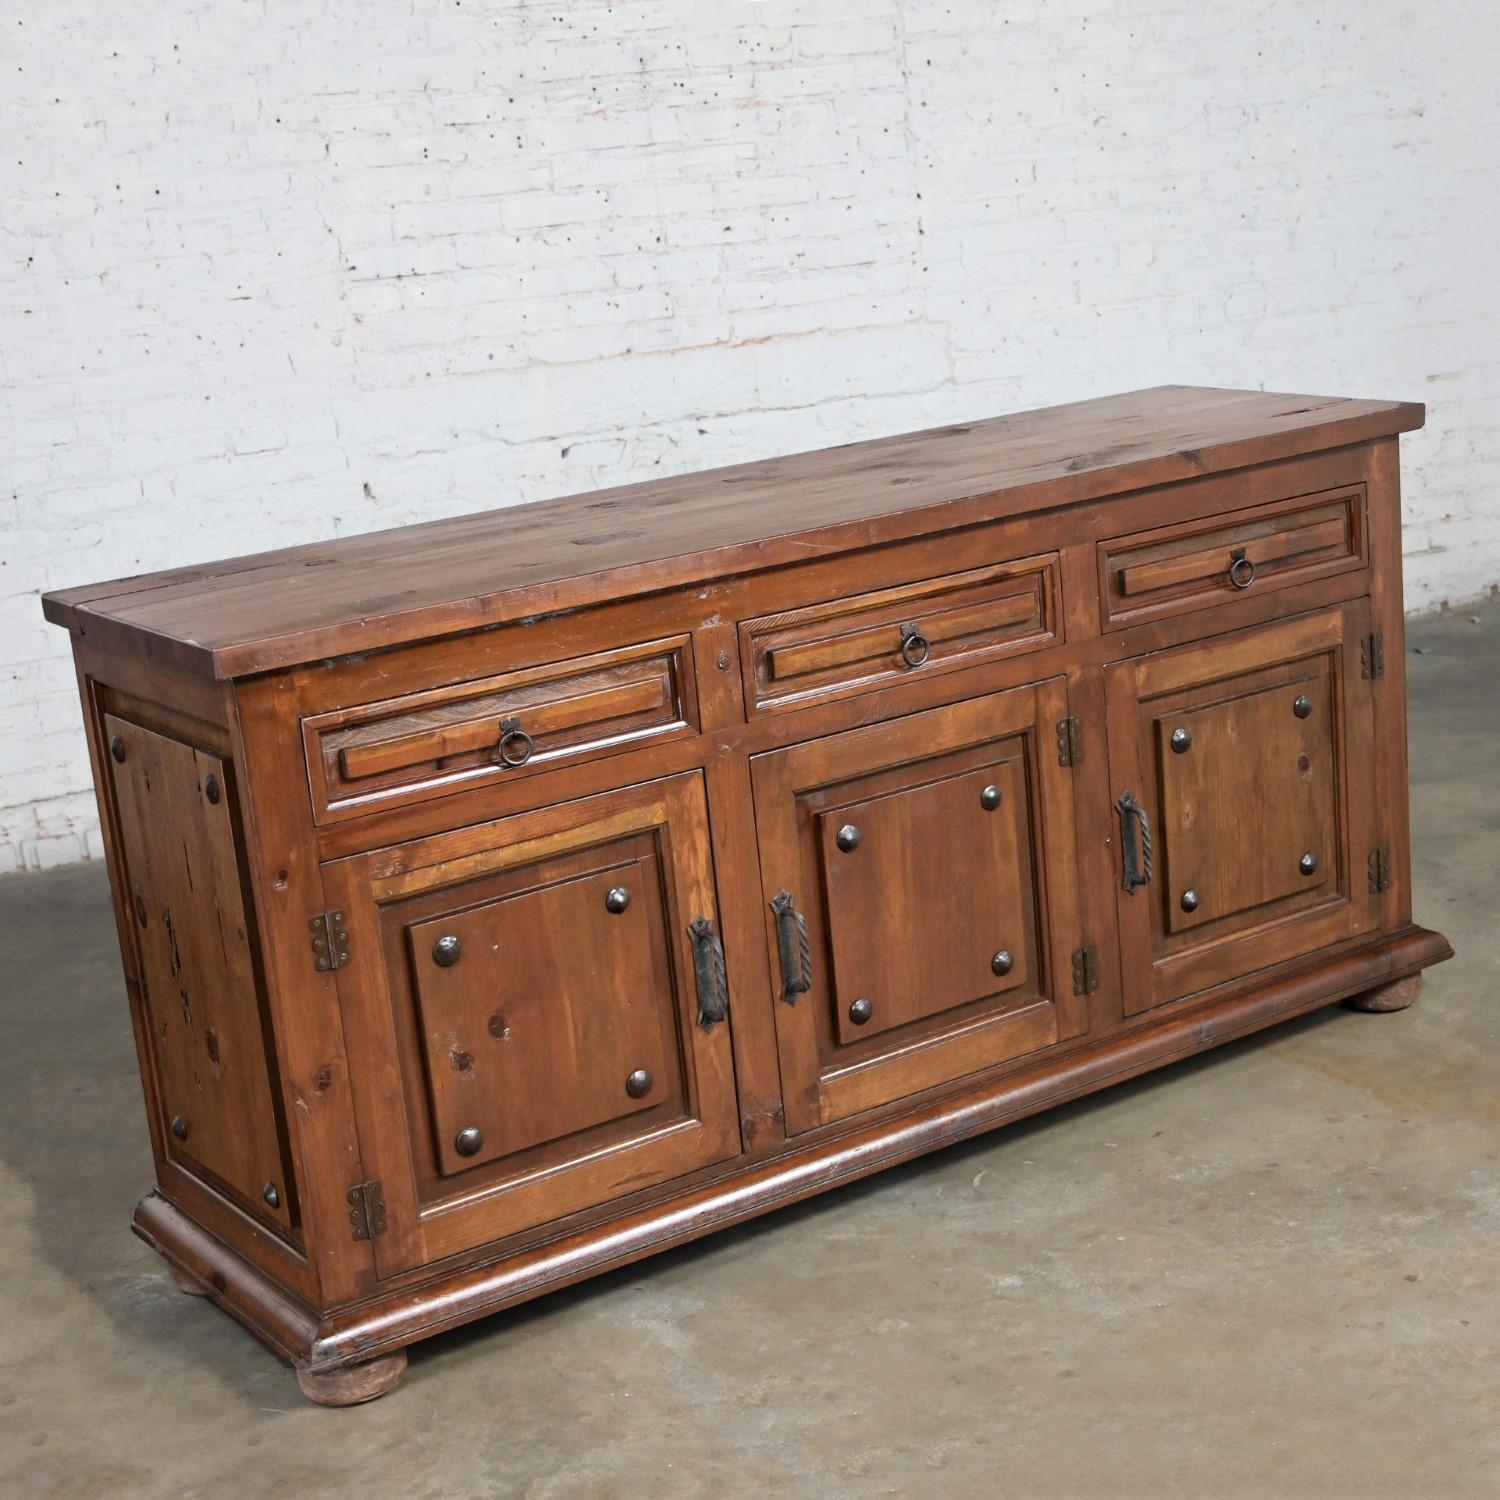 Handsome vintage Spanish Revival Rustic solid pine sideboard in the style of Artes De Mexico Internationales SA. Beautiful condition, keeping in mind that this is vintage and not new so will have signs of use and wear even if it has been refinished